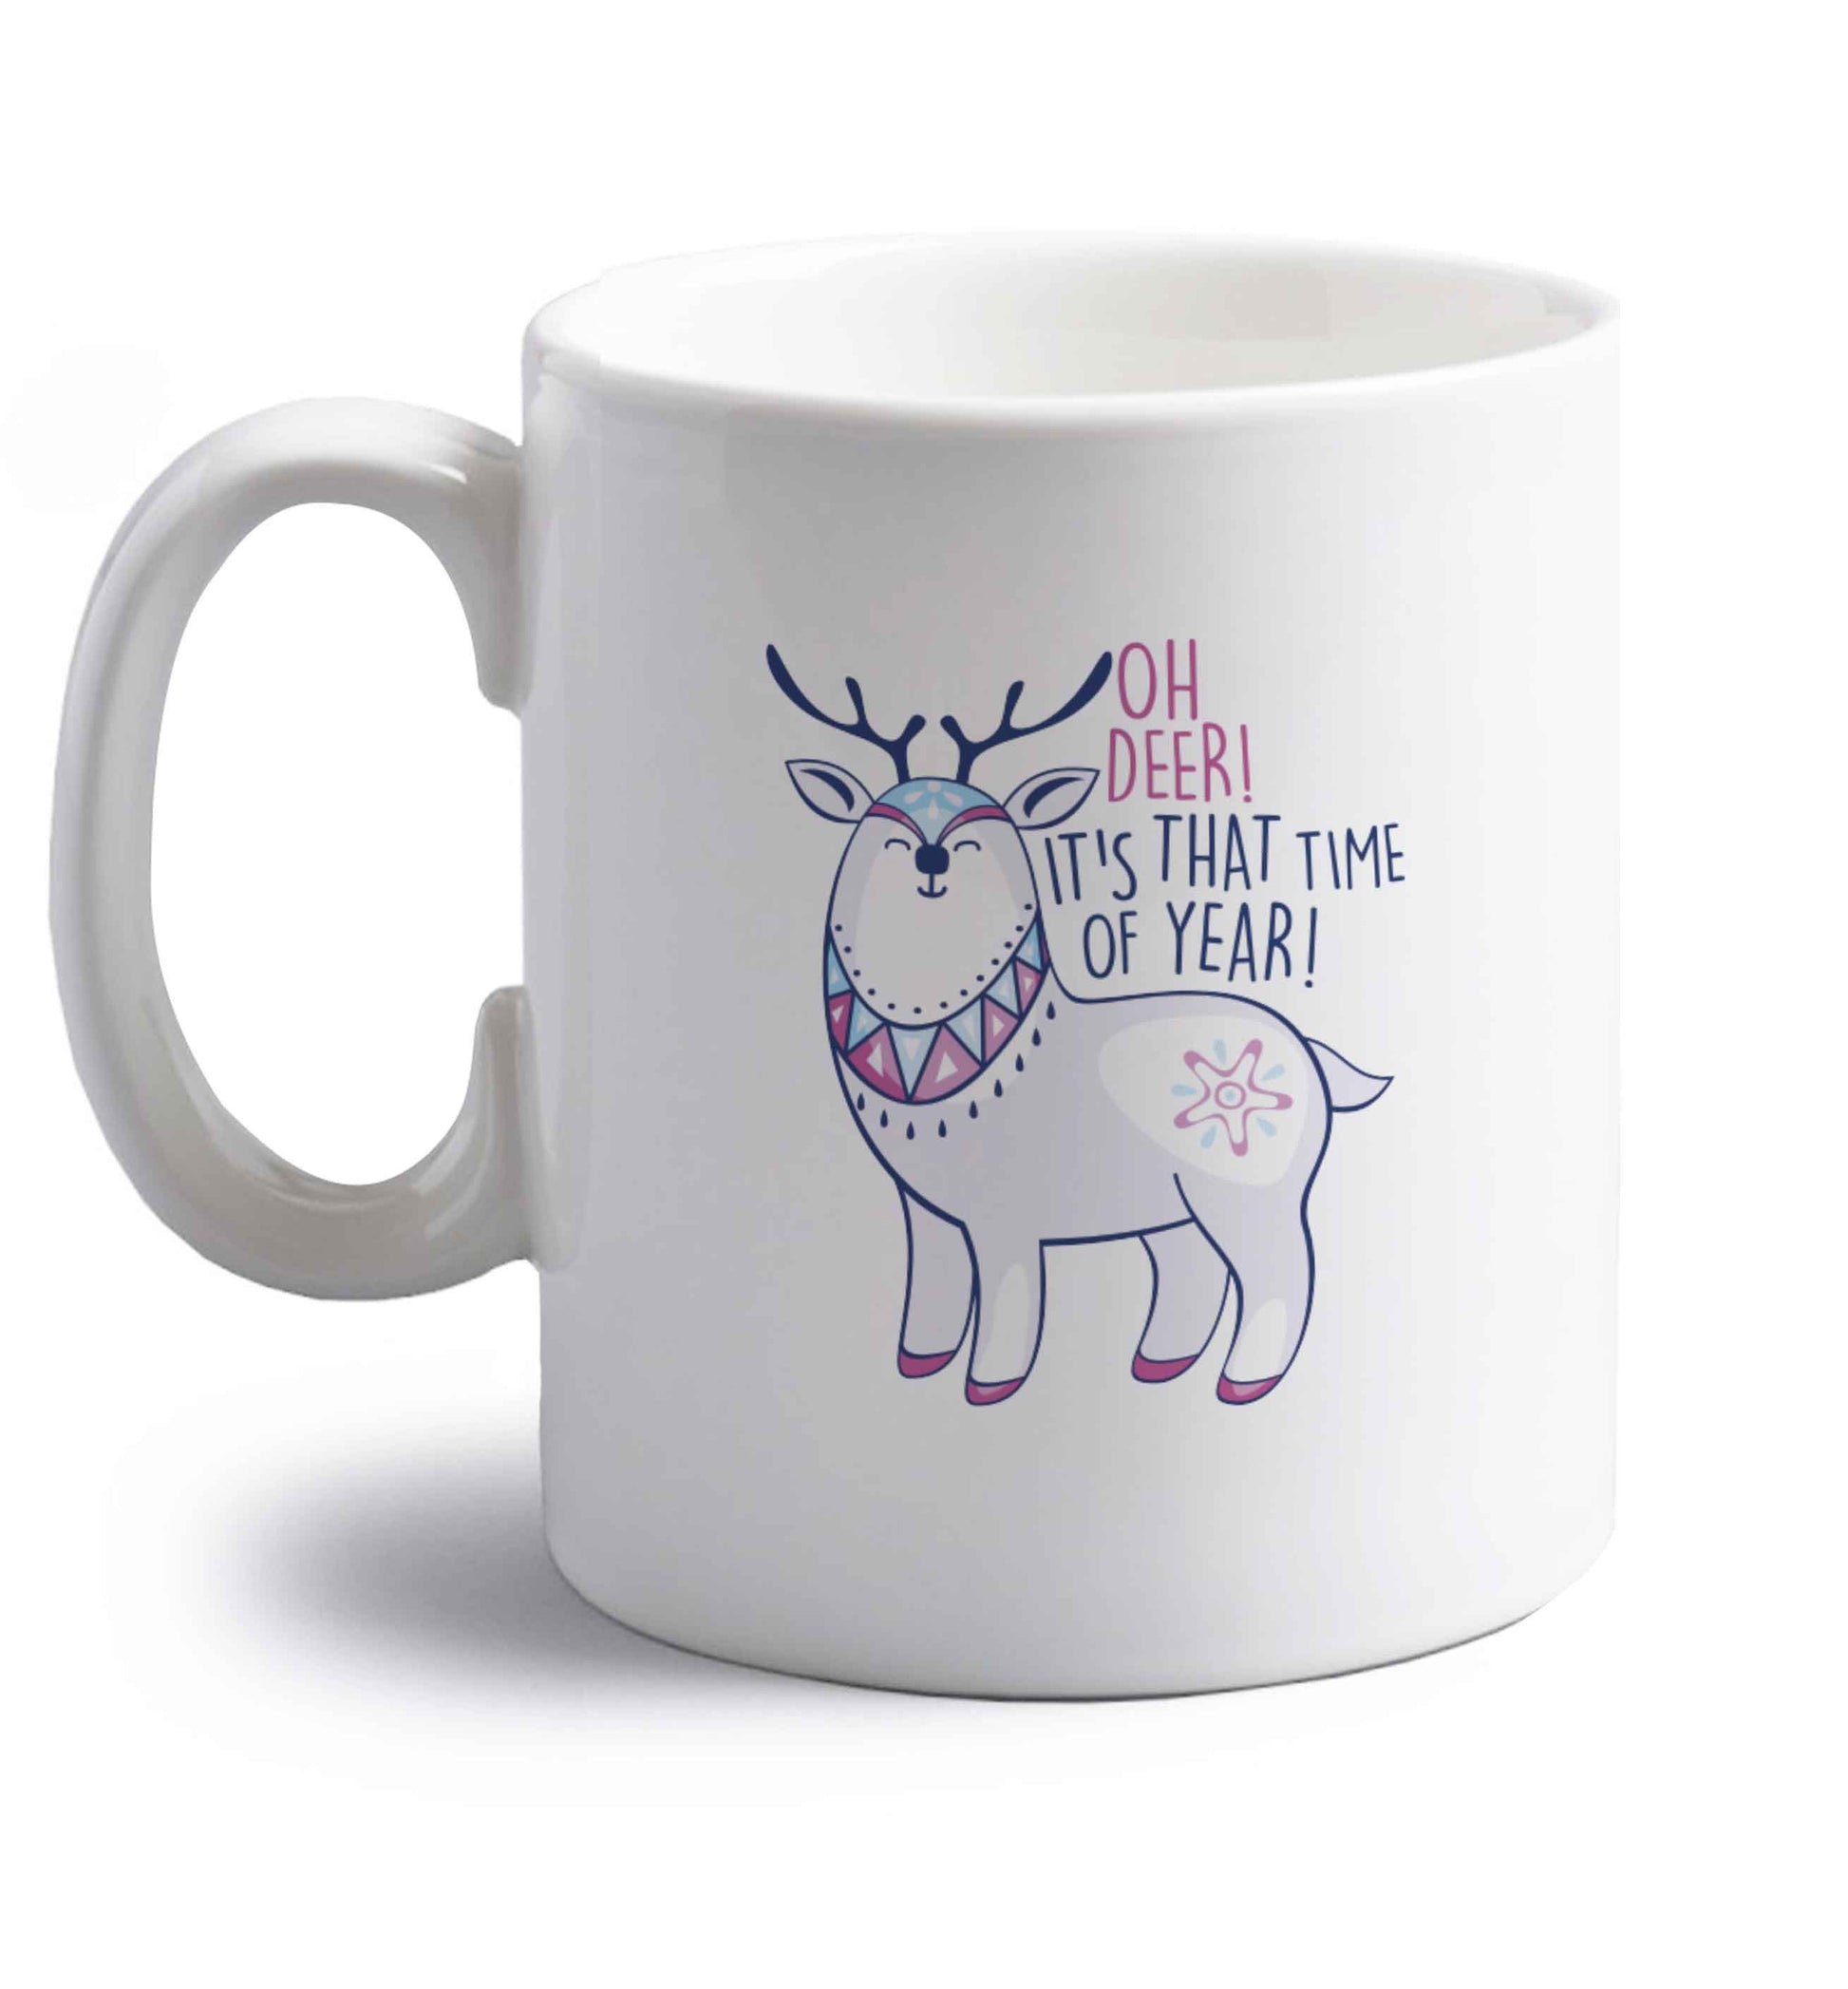 Oh dear it's that time of year right handed white ceramic mug 